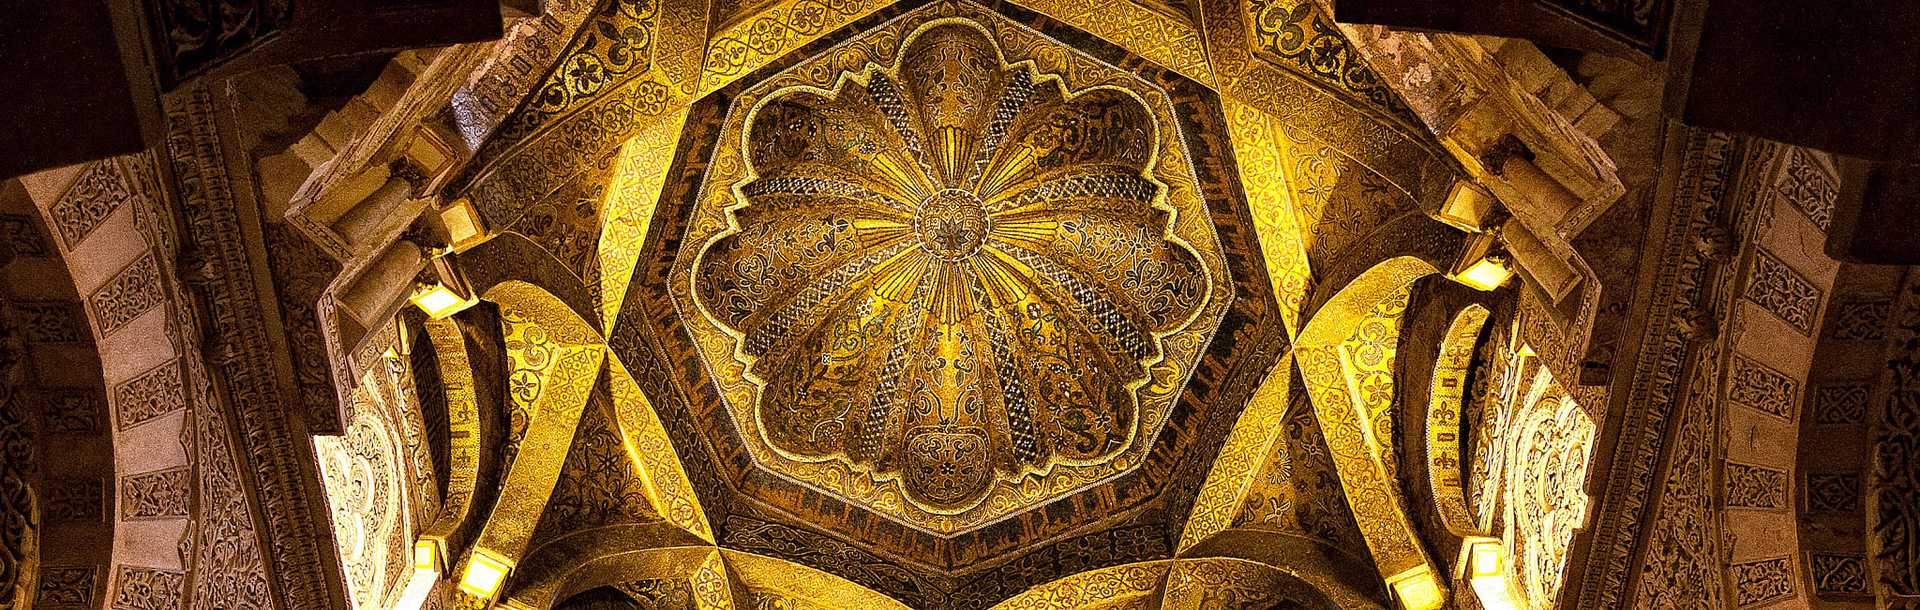 Architectural detail showcasing the golden dome of the Mosque of Cordoba